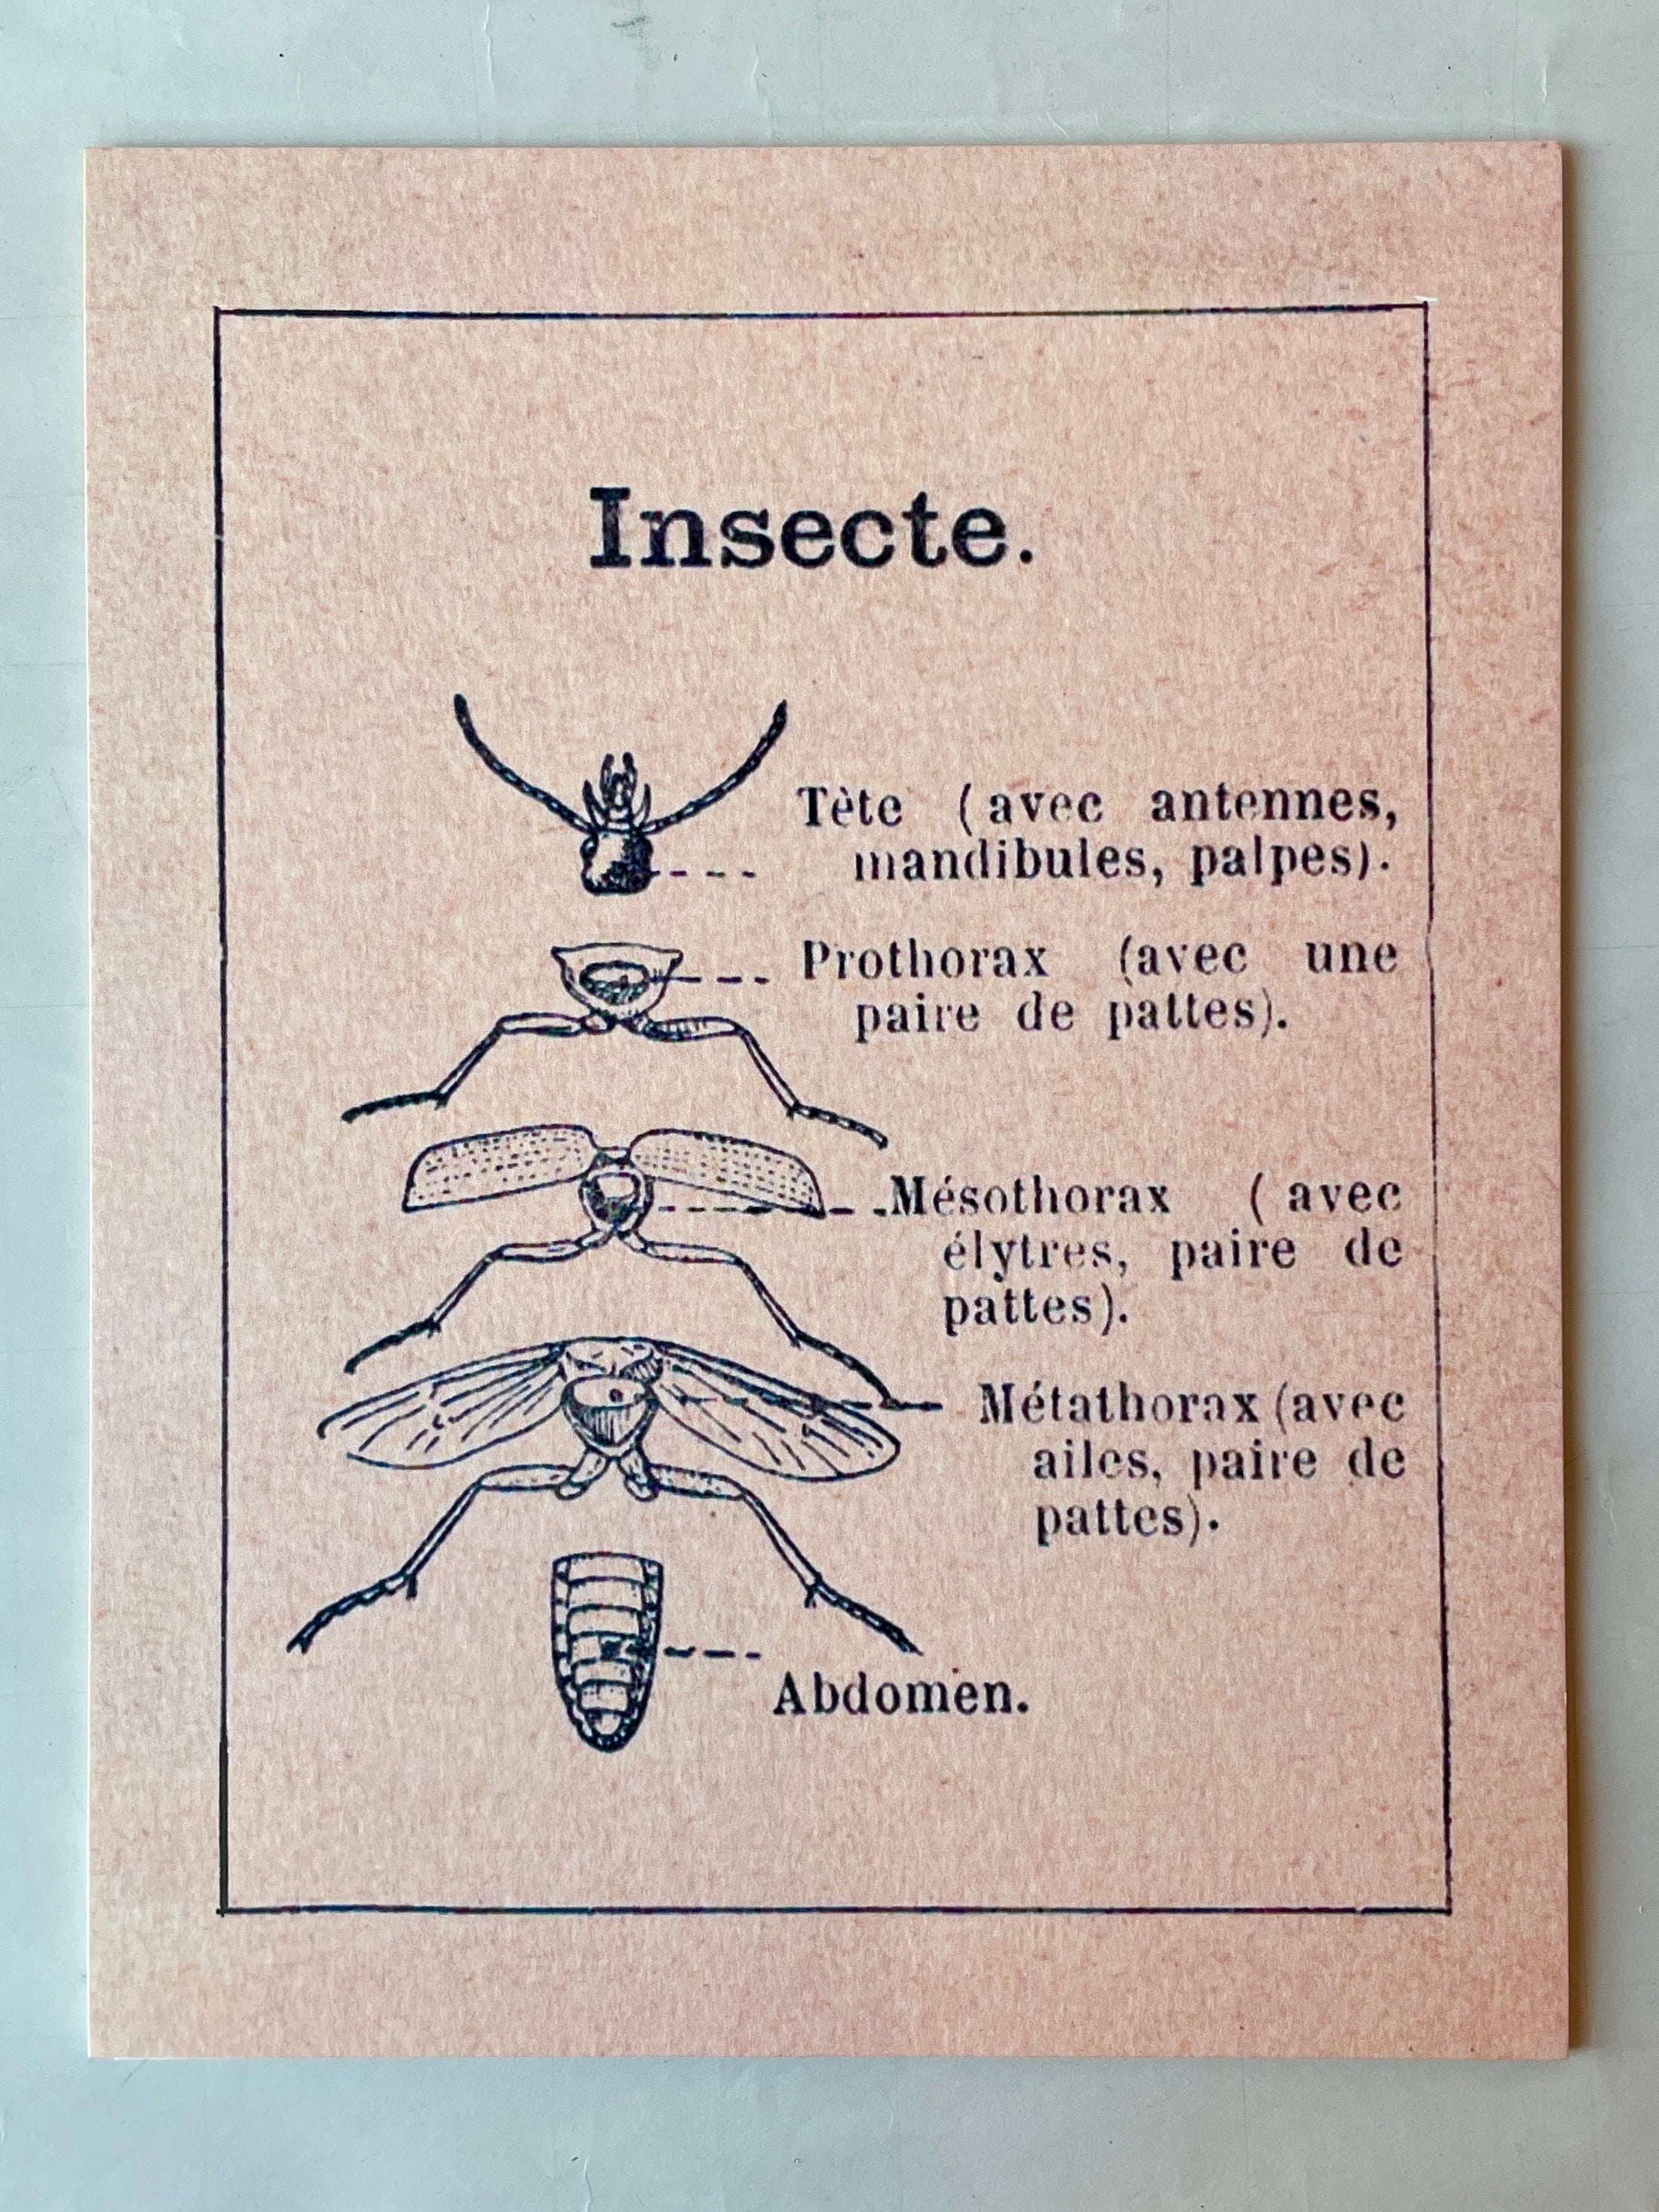 The Anatomy of an Insect Art Print